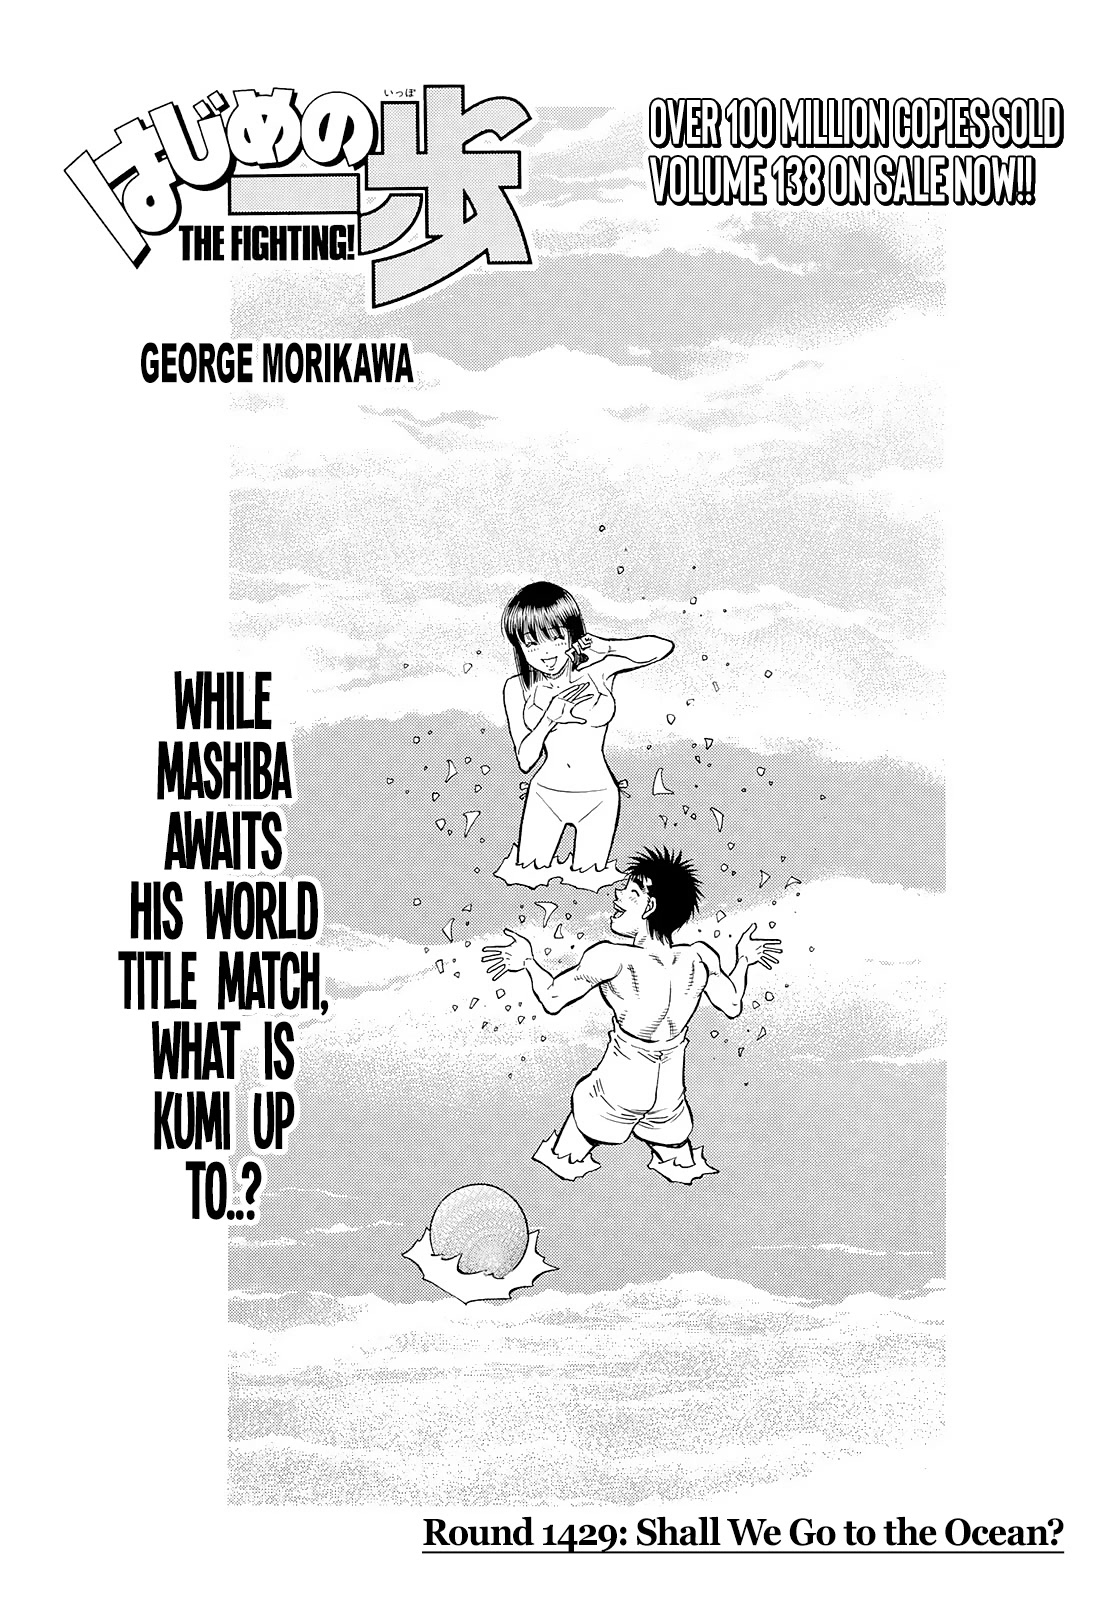 Hajime no Ippo, Chapter 1429 Shall We go to the Ocean image 01